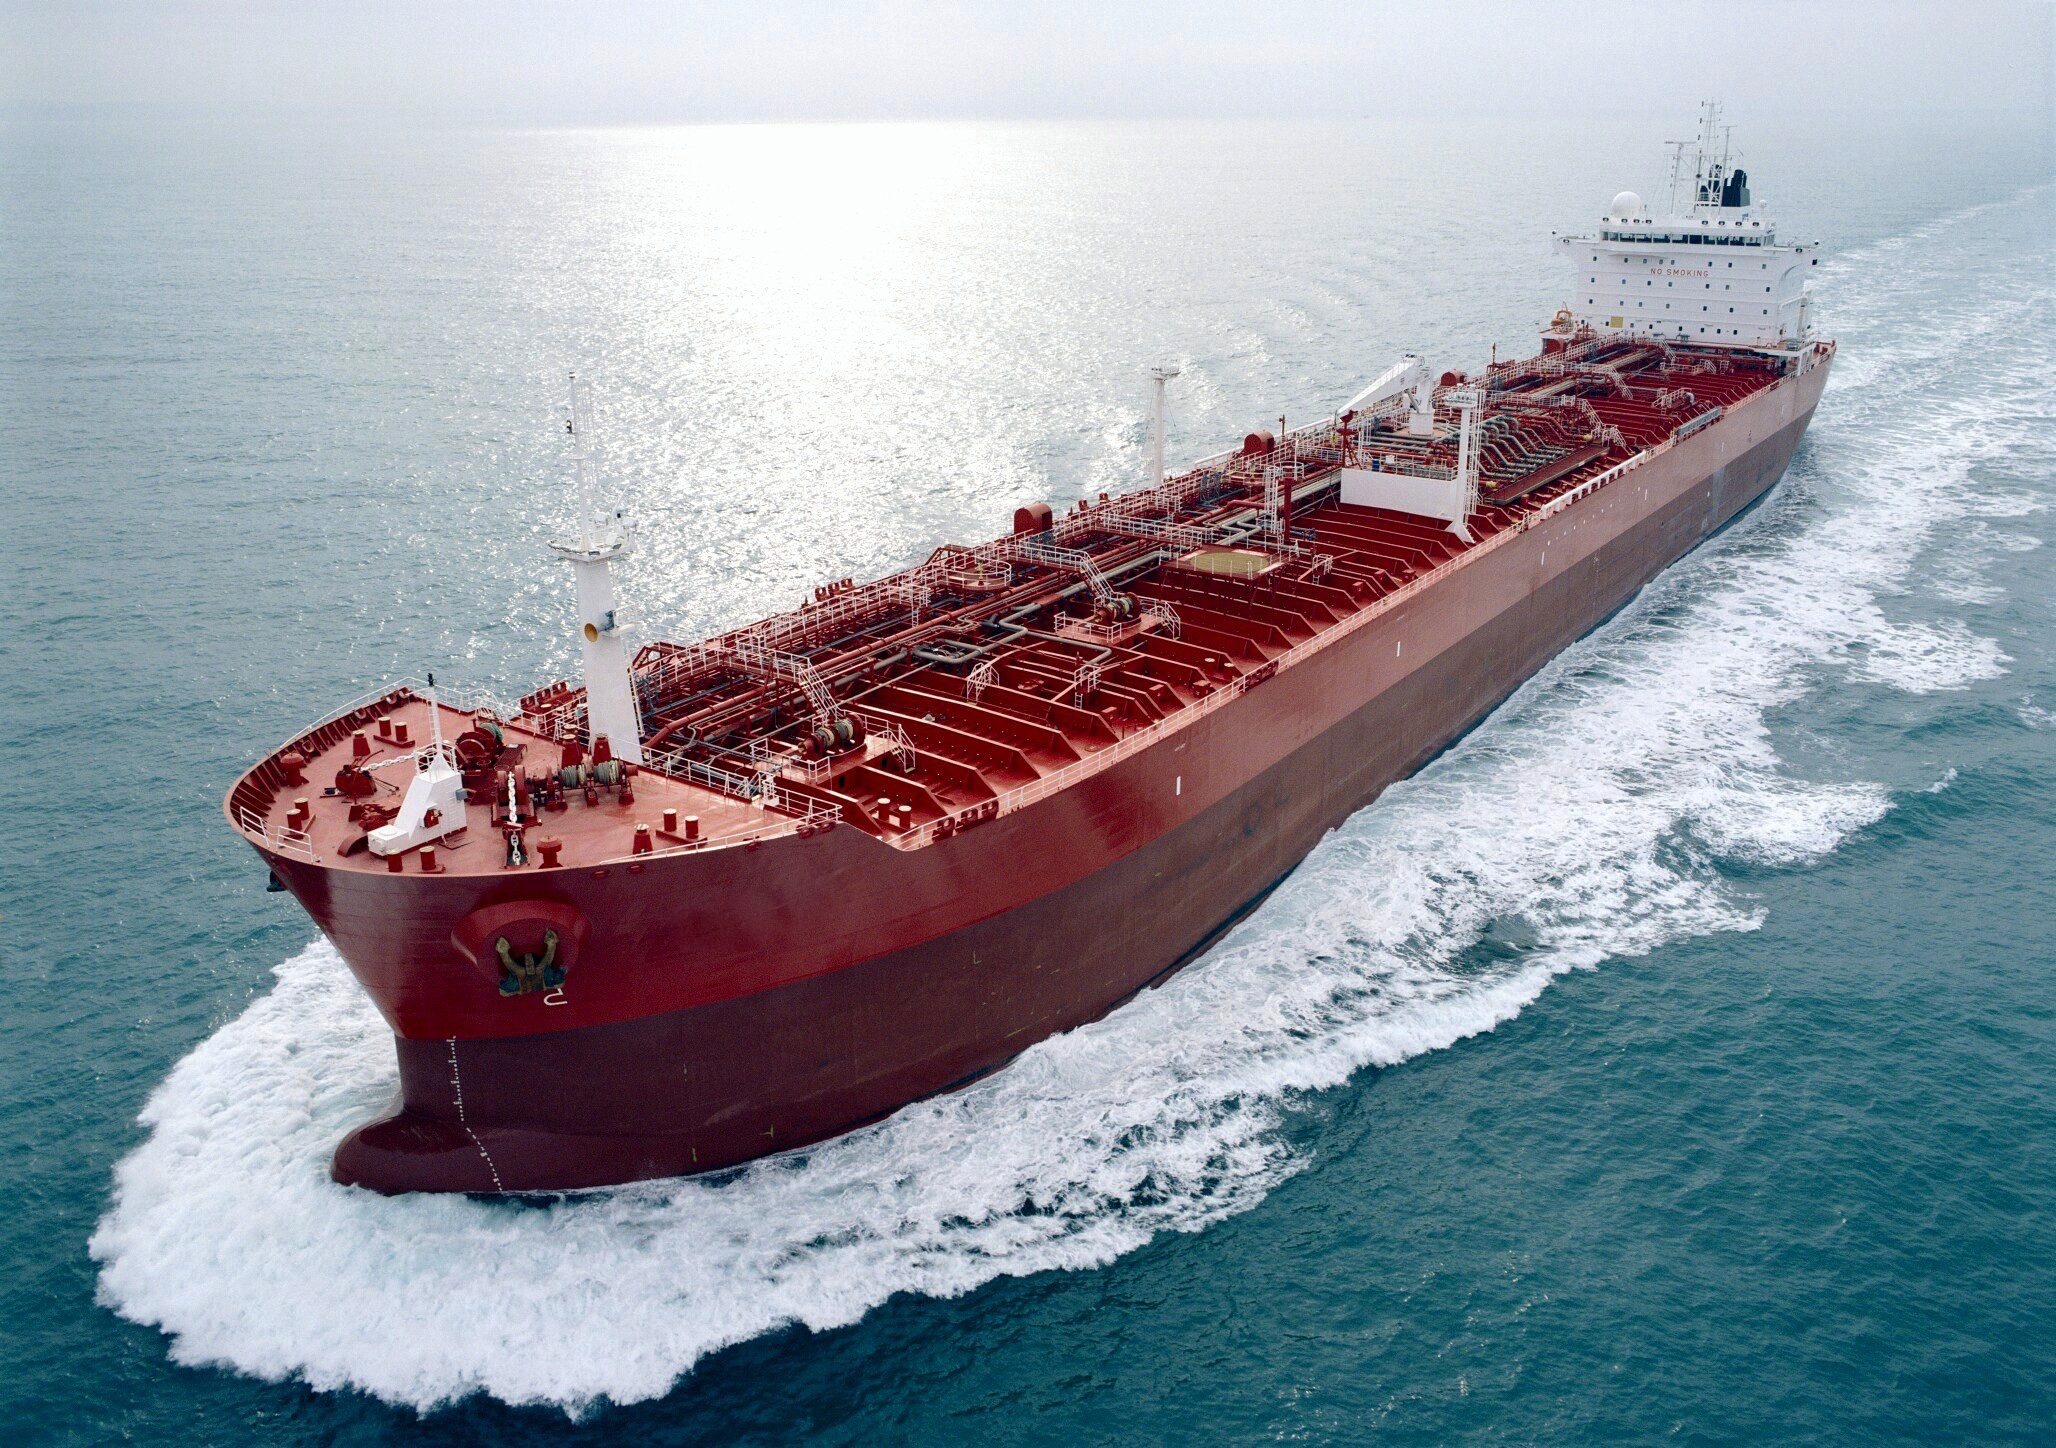 Thome Group Transfers 100 Ships To Marlink S Hybrid Network To Streamline Digital Operations